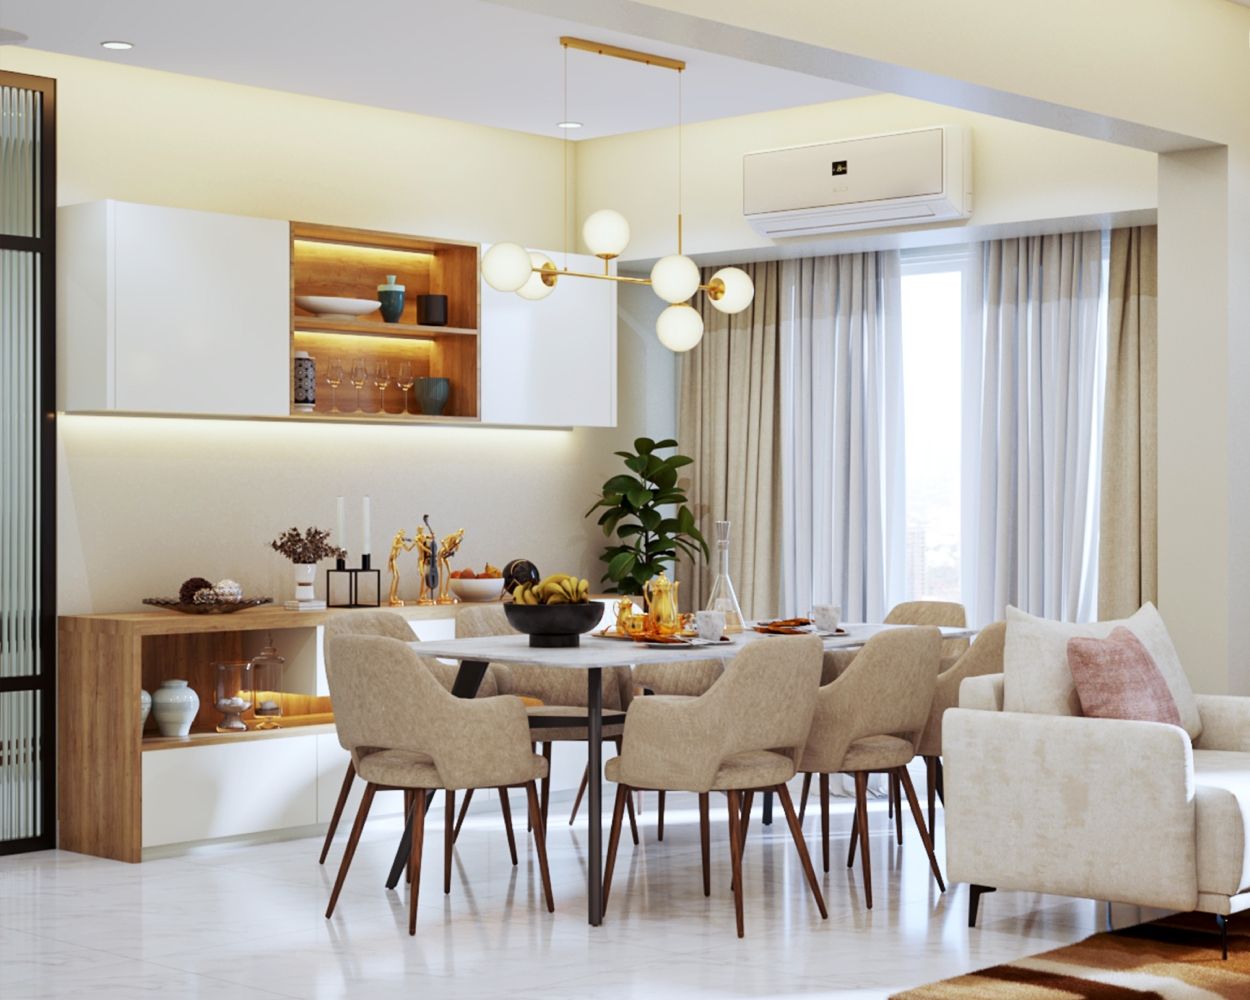 Modern Beige And White 8-Seater Dining Room Design With Spacious Storage Unit